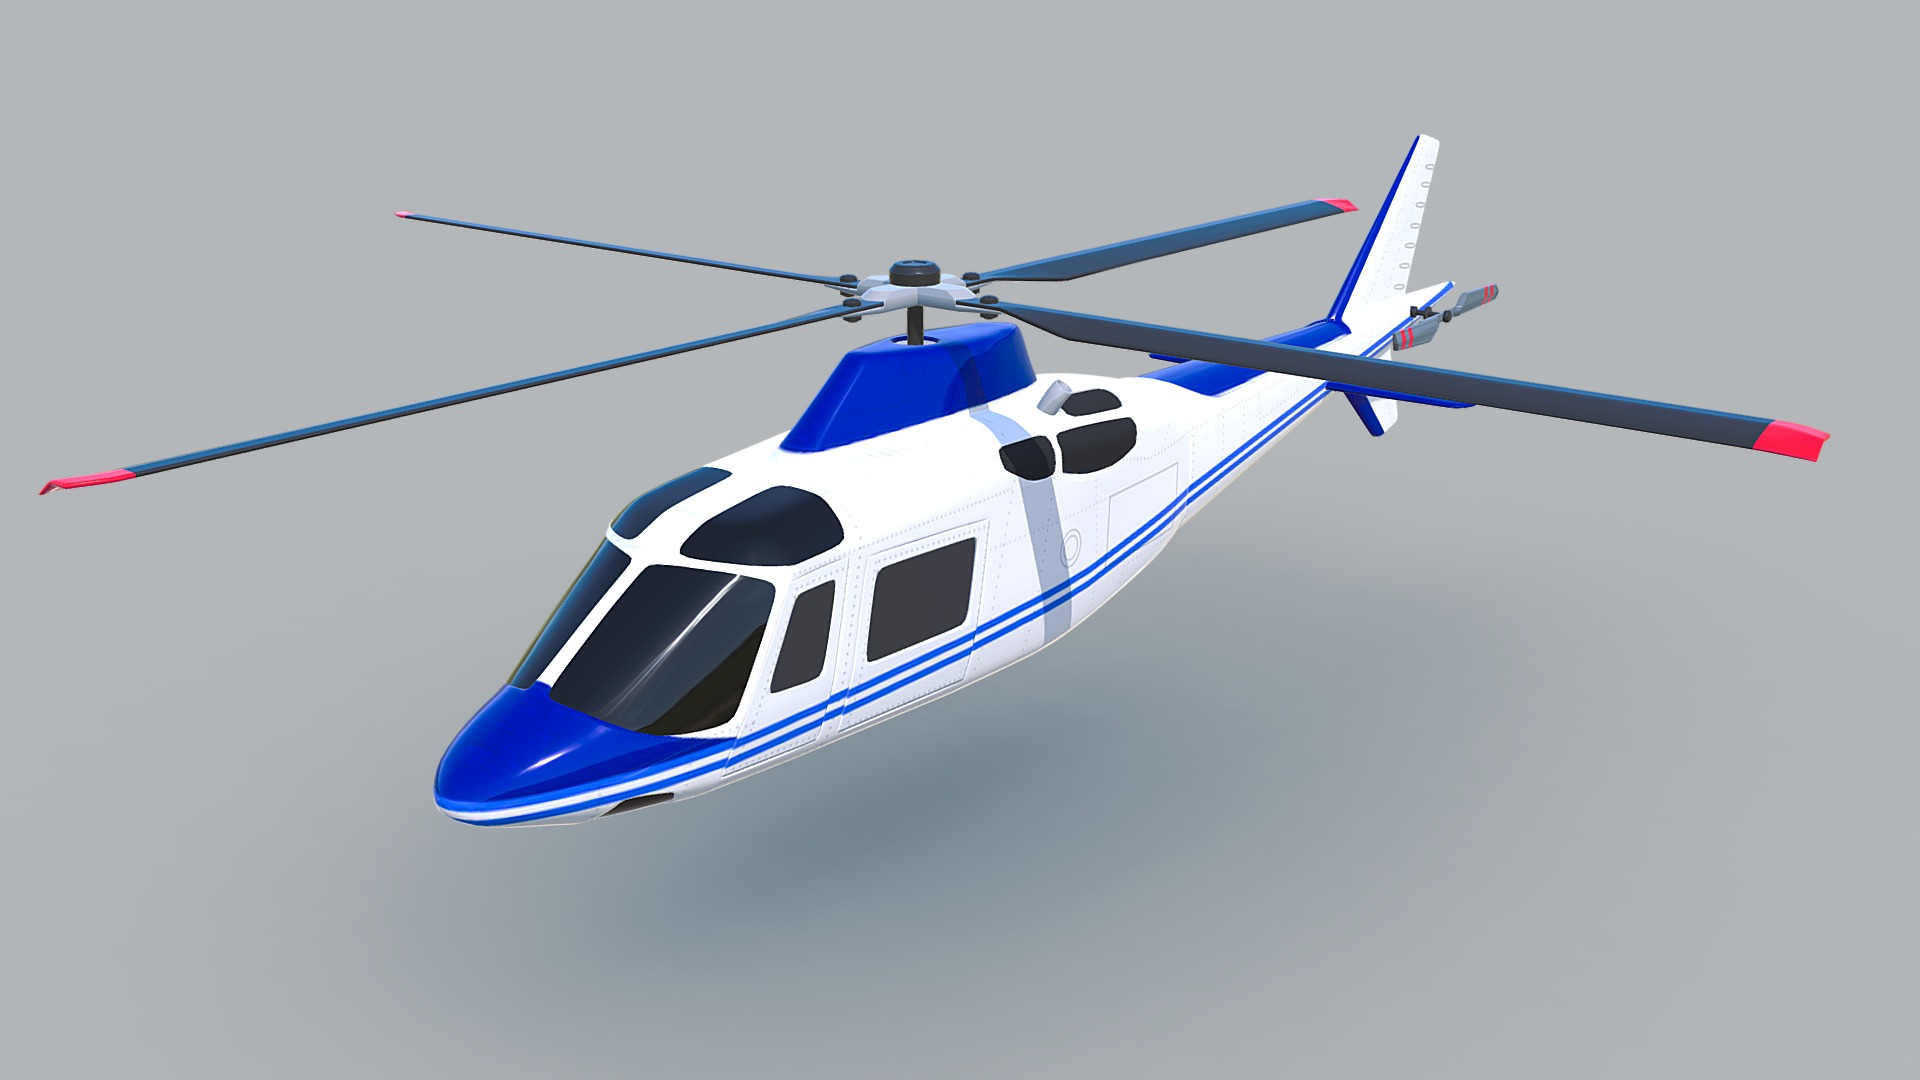 3D model Agusta westland AW109 helicopter - This is a 3D model of the Agusta westland AW109 helicopter. The 3D model is about a helicopter in the sky.